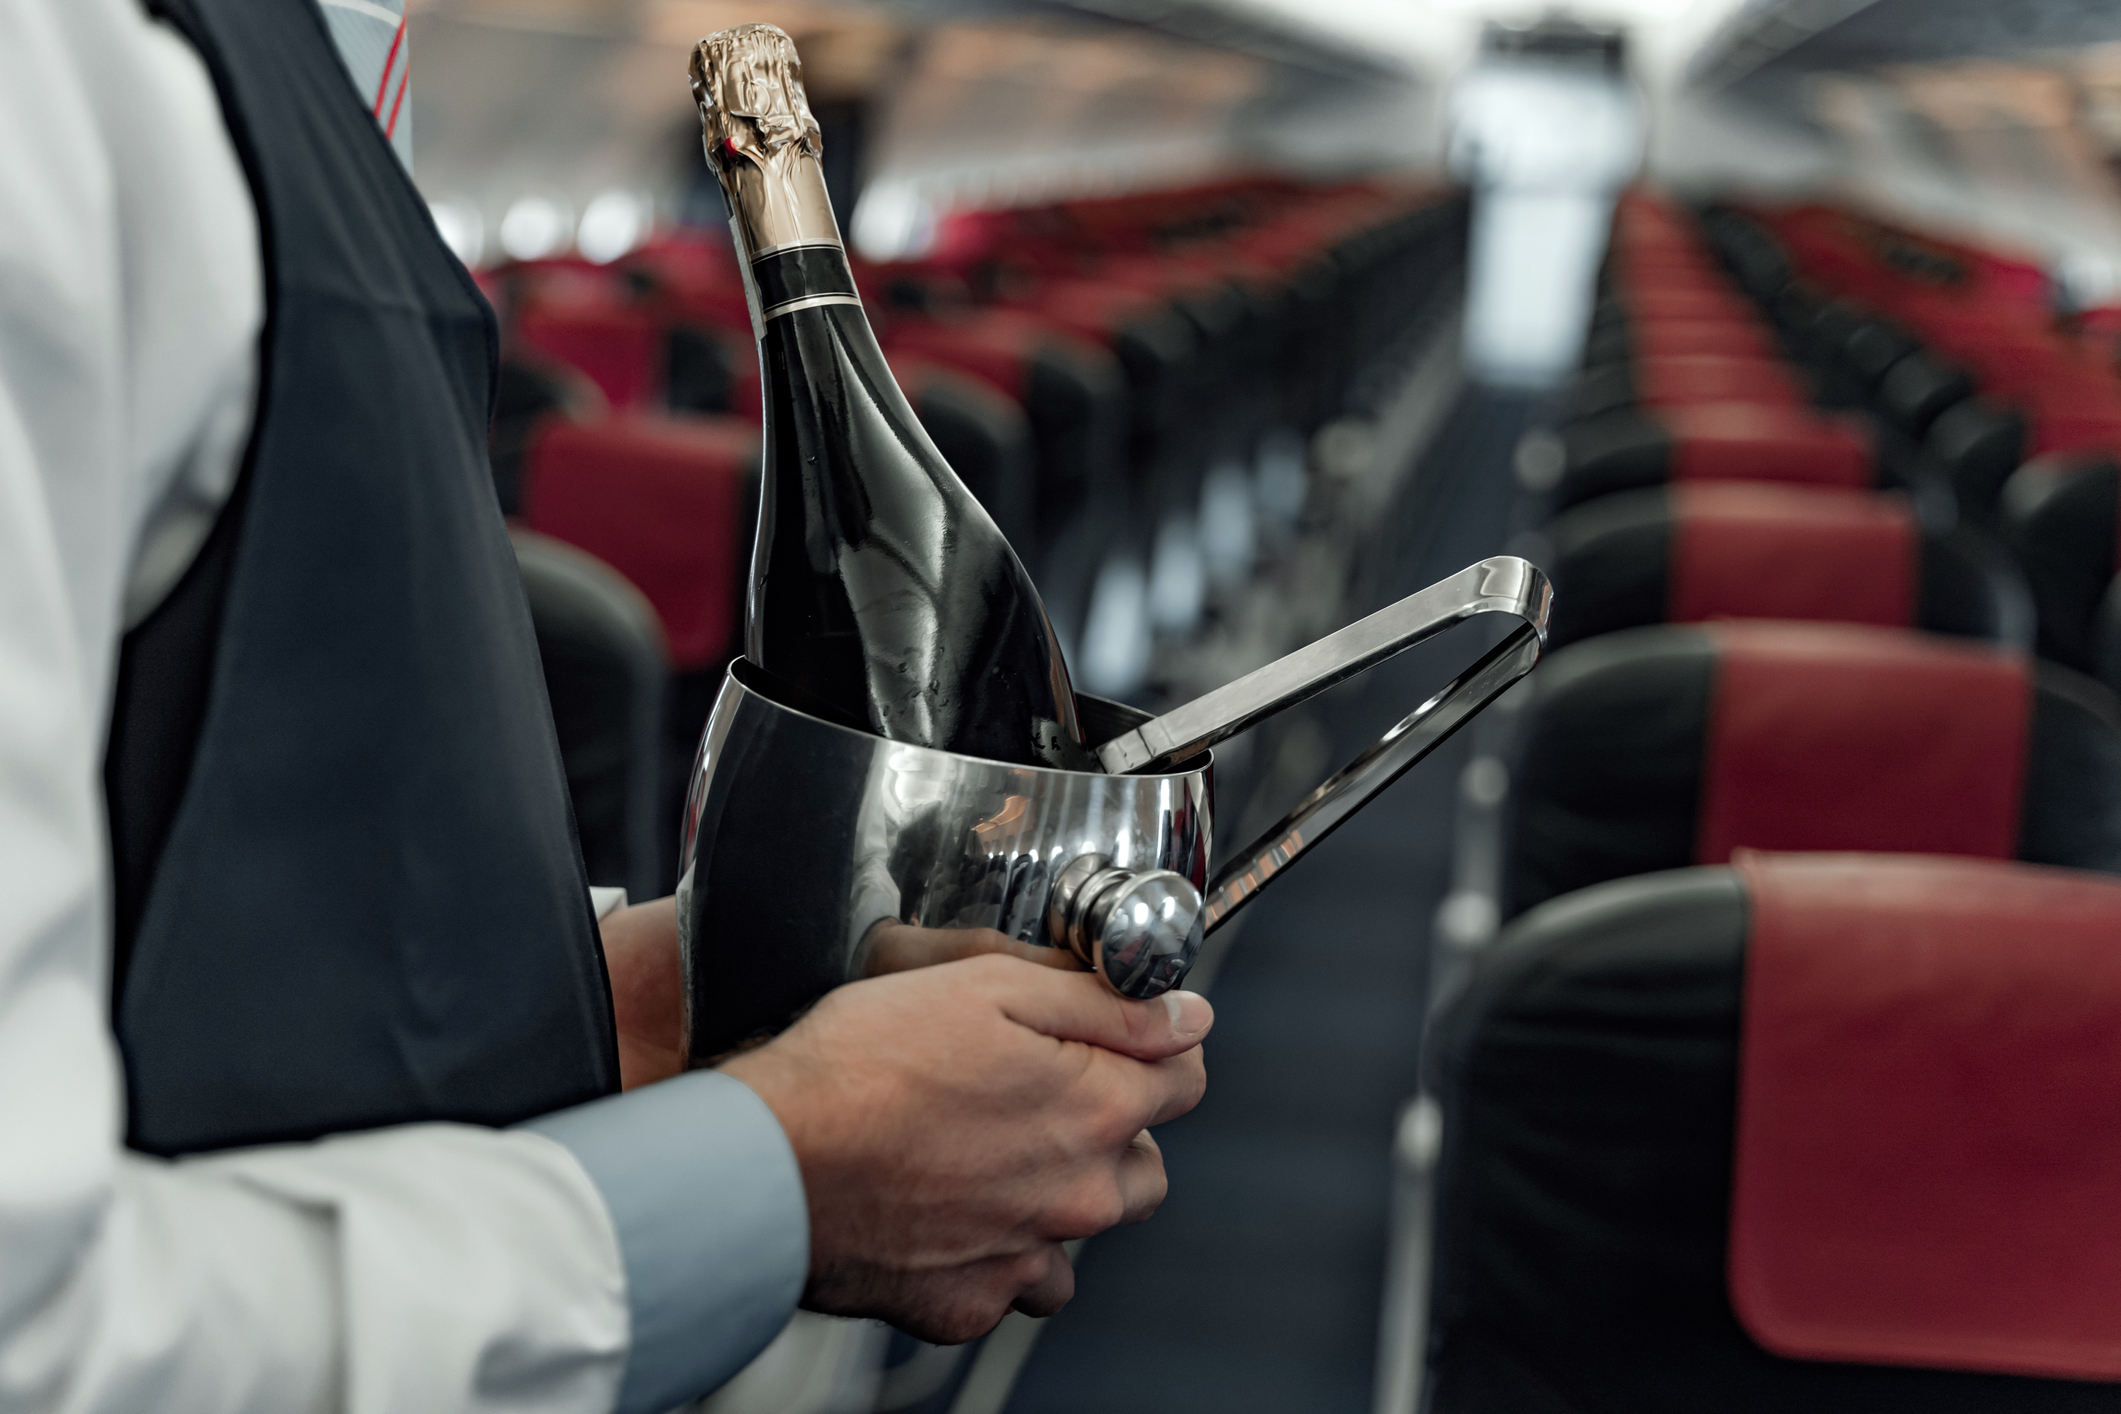 British Airways looks to hire Master of Wine - a stewardess holding Champagne